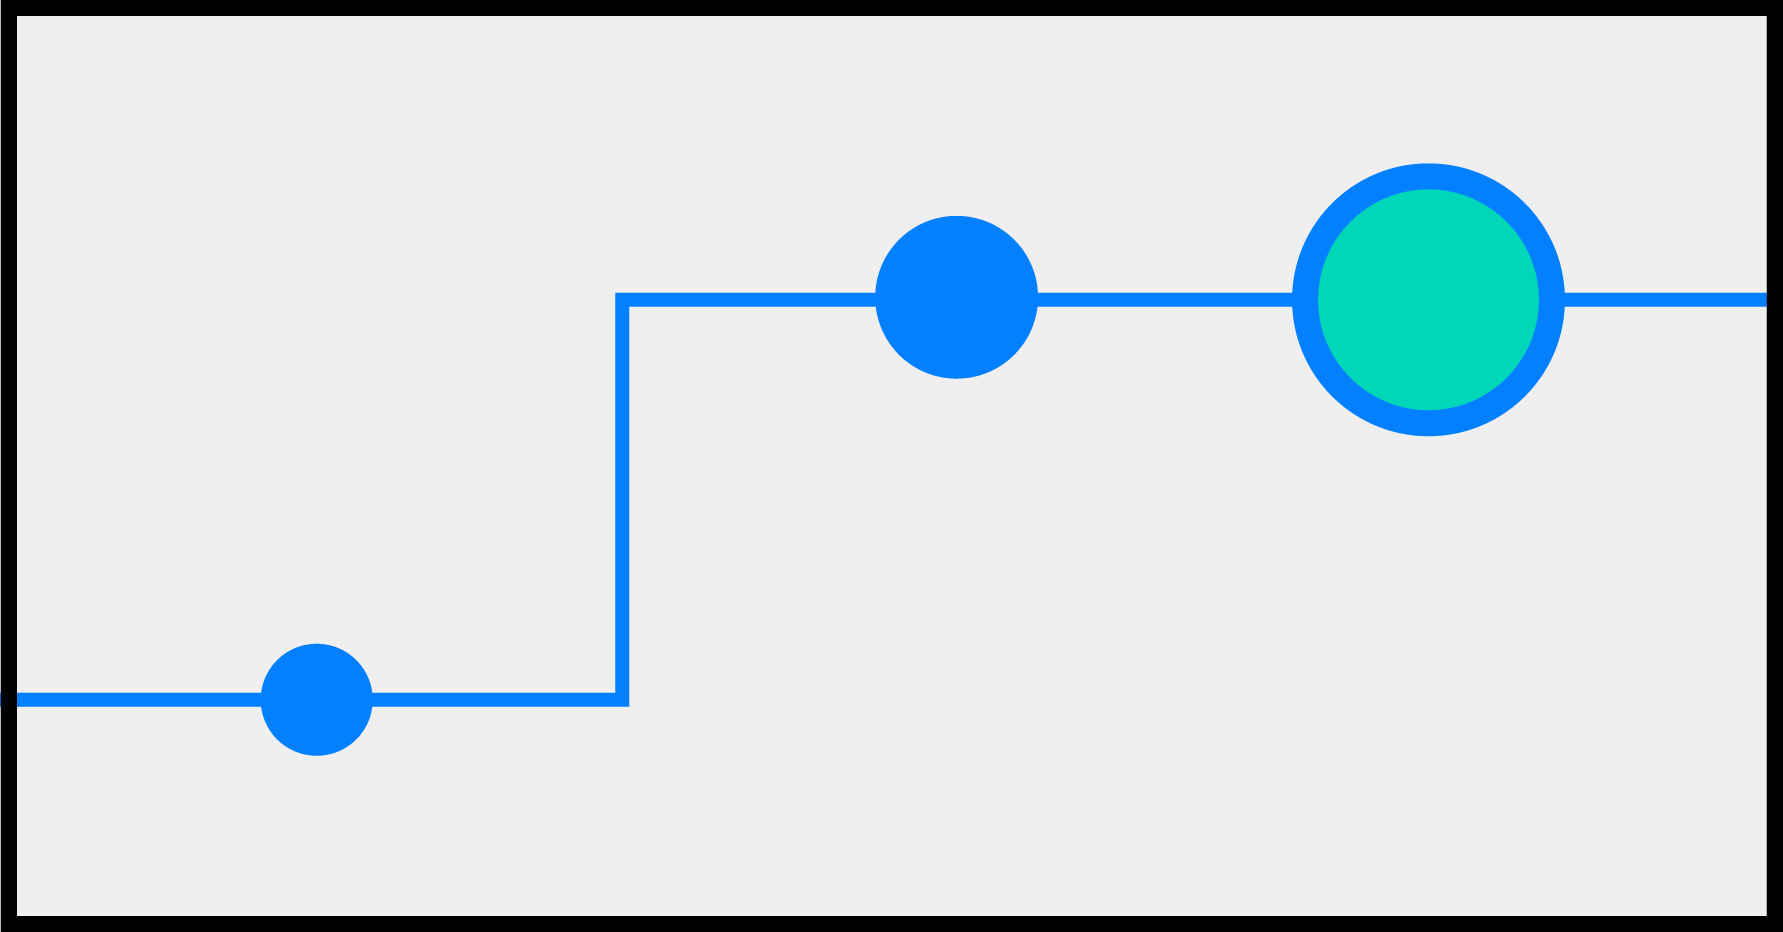 Stylistic illustration of circles along a line